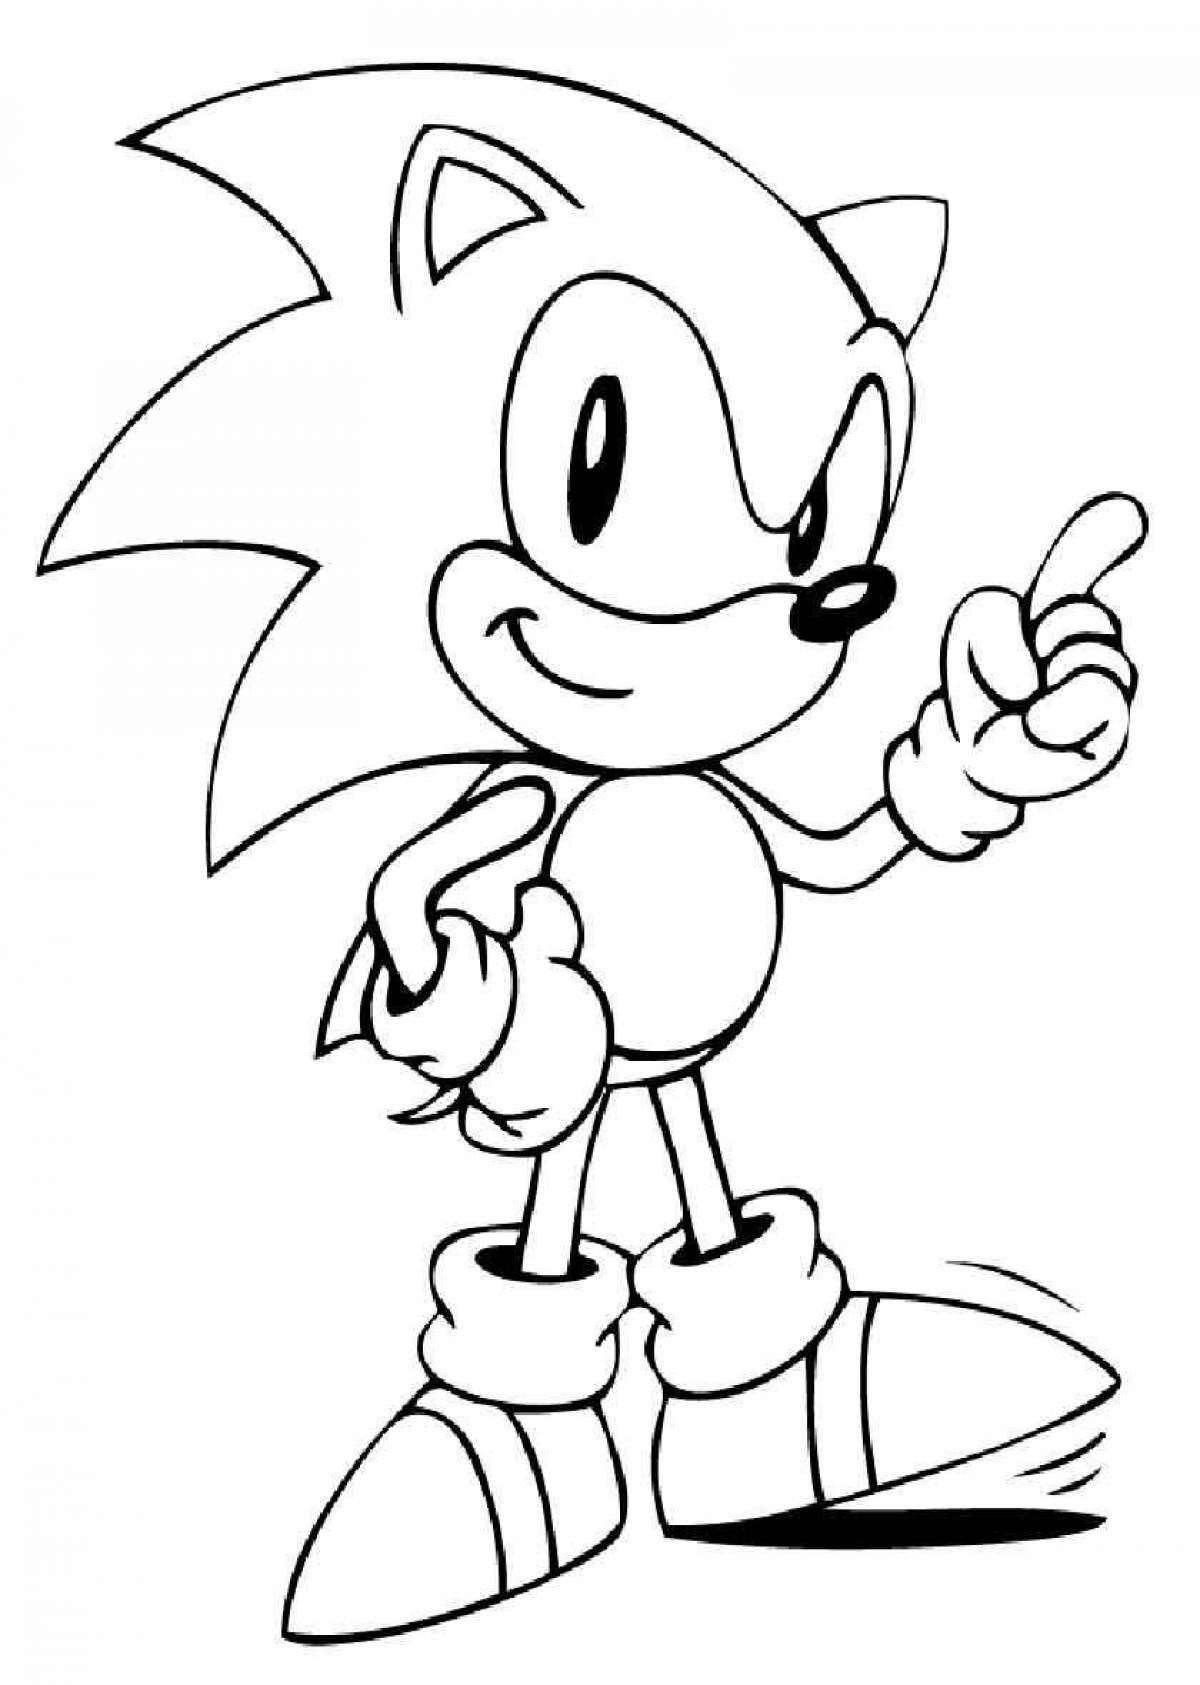 Colorful sonic prime coloring book